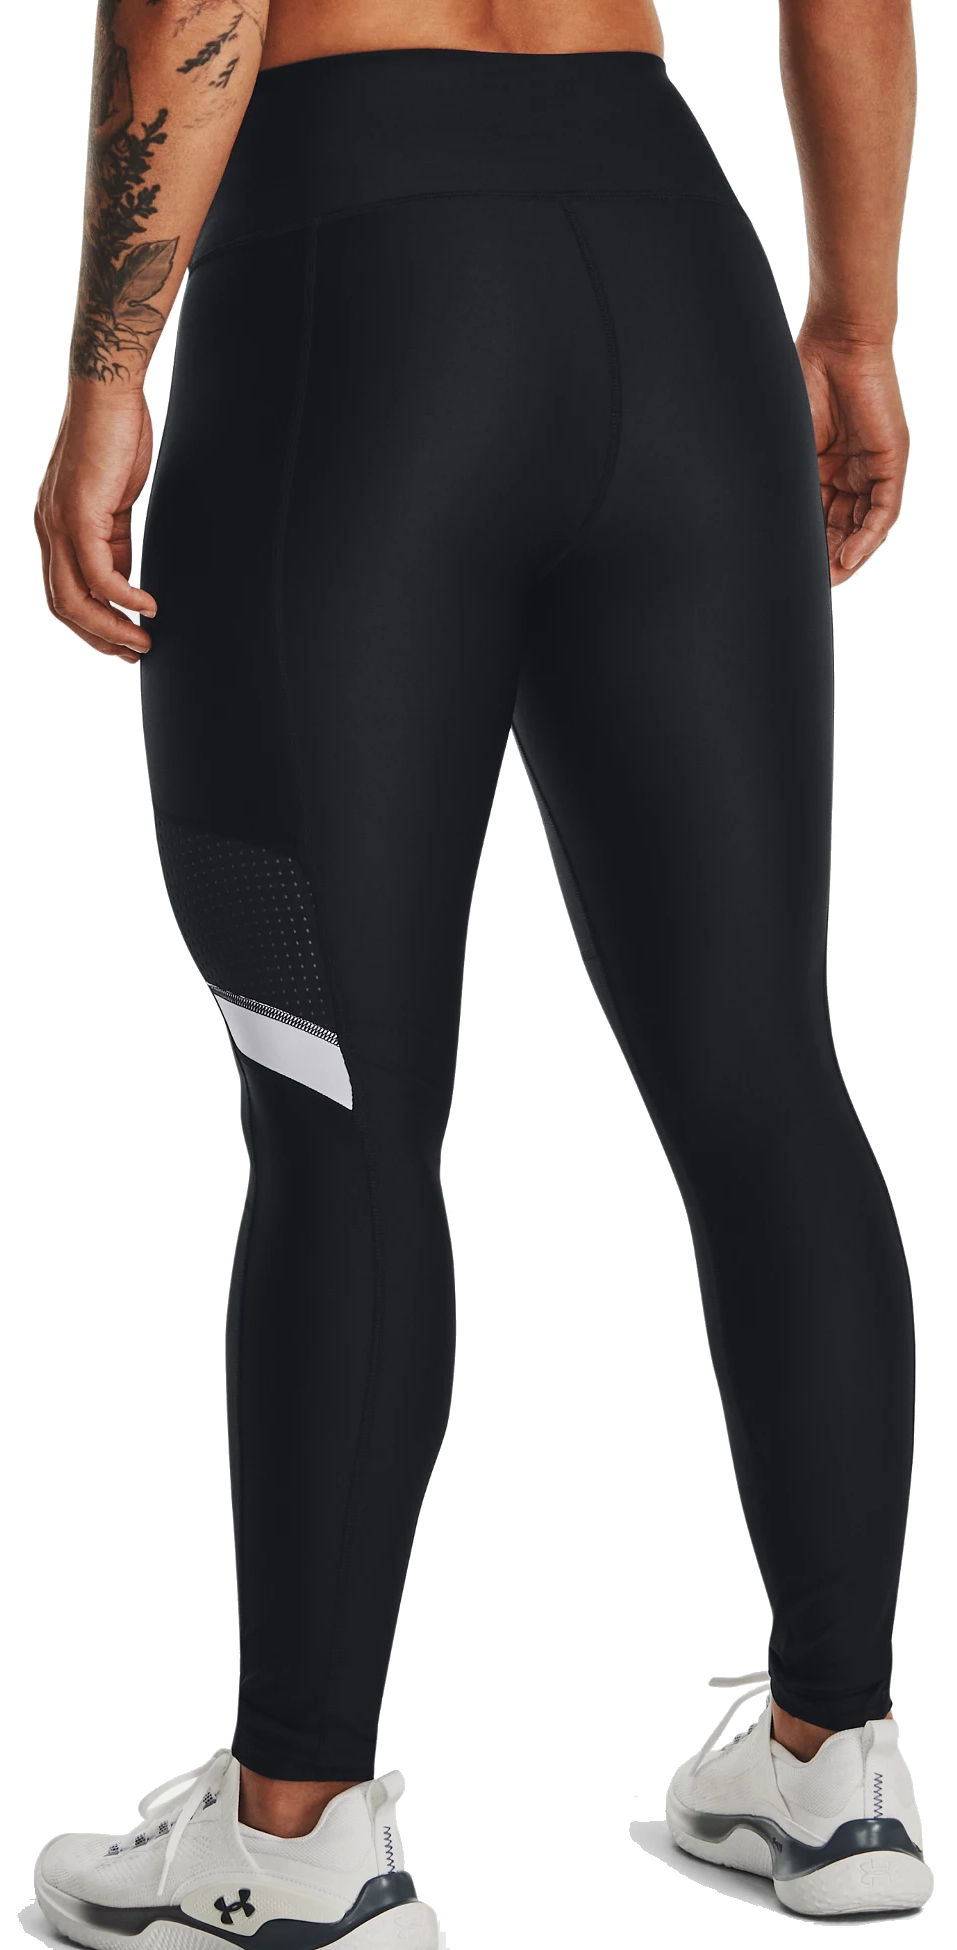 https://i1.t4s.cz/products/1378753-001/under-armour-under-armour-armour-mesh-panel-leg-559721-1378753-002.jpg